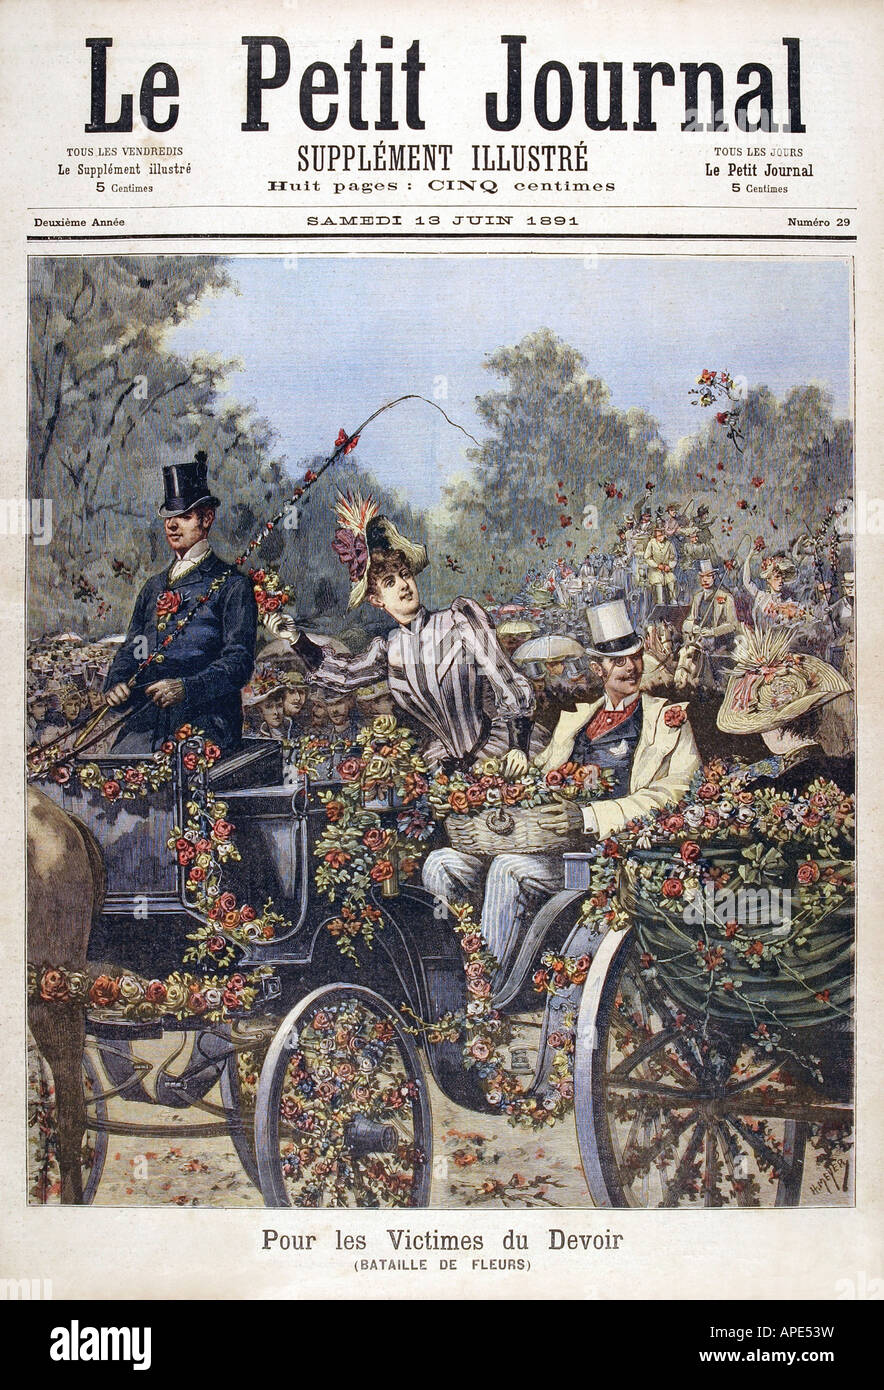 press/media, magazines, 'Le Petit Journal', Paris, 2. volume, number 29, illustrated supplement, Saturday 13 June 1891, title, 'The battle of the flowers', , Stock Photo